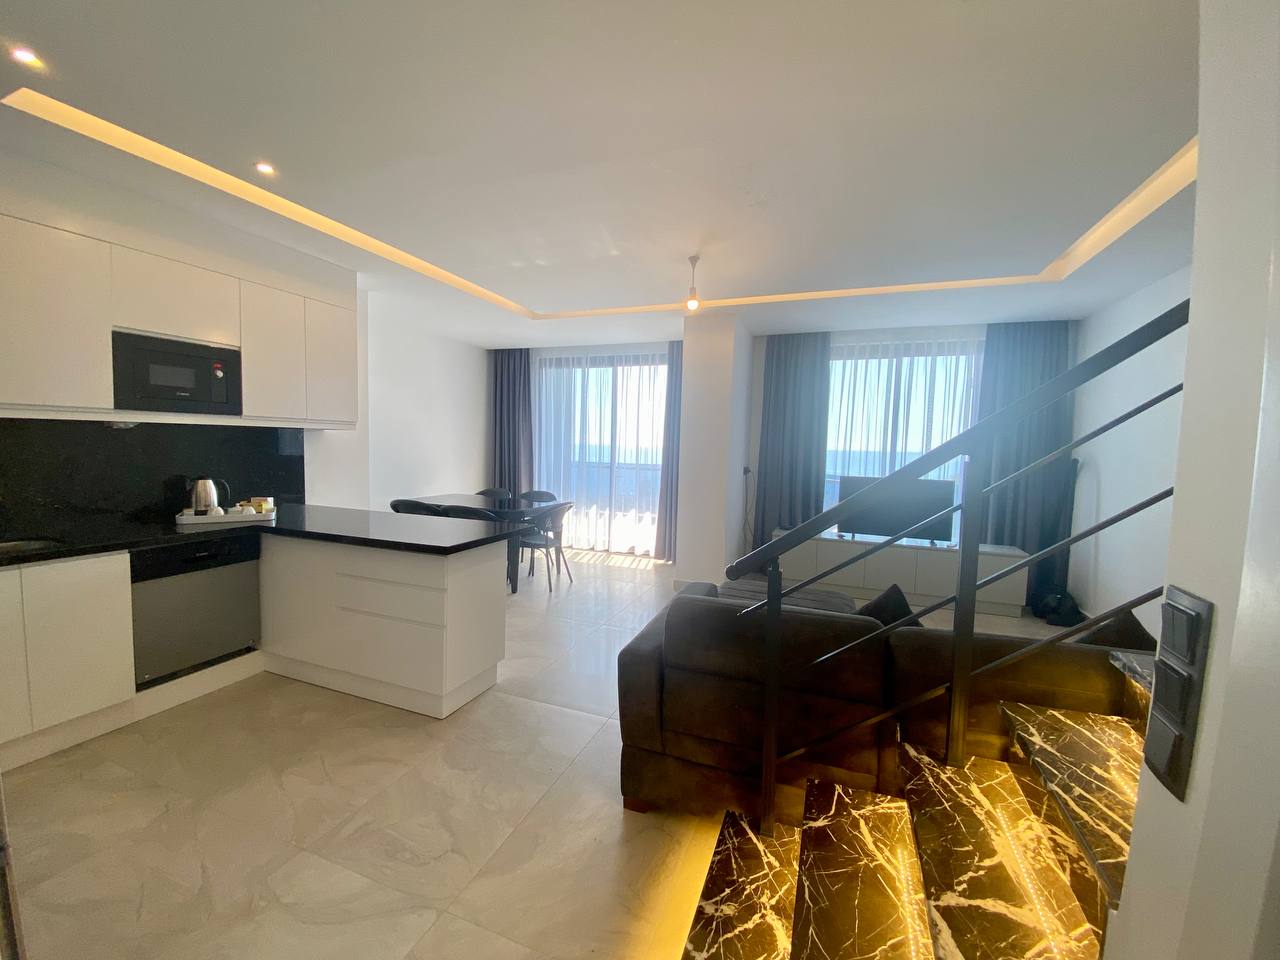 N°23 - Boutique 16 - Duplex Sea Front, For 8 People, Ultra Luxury